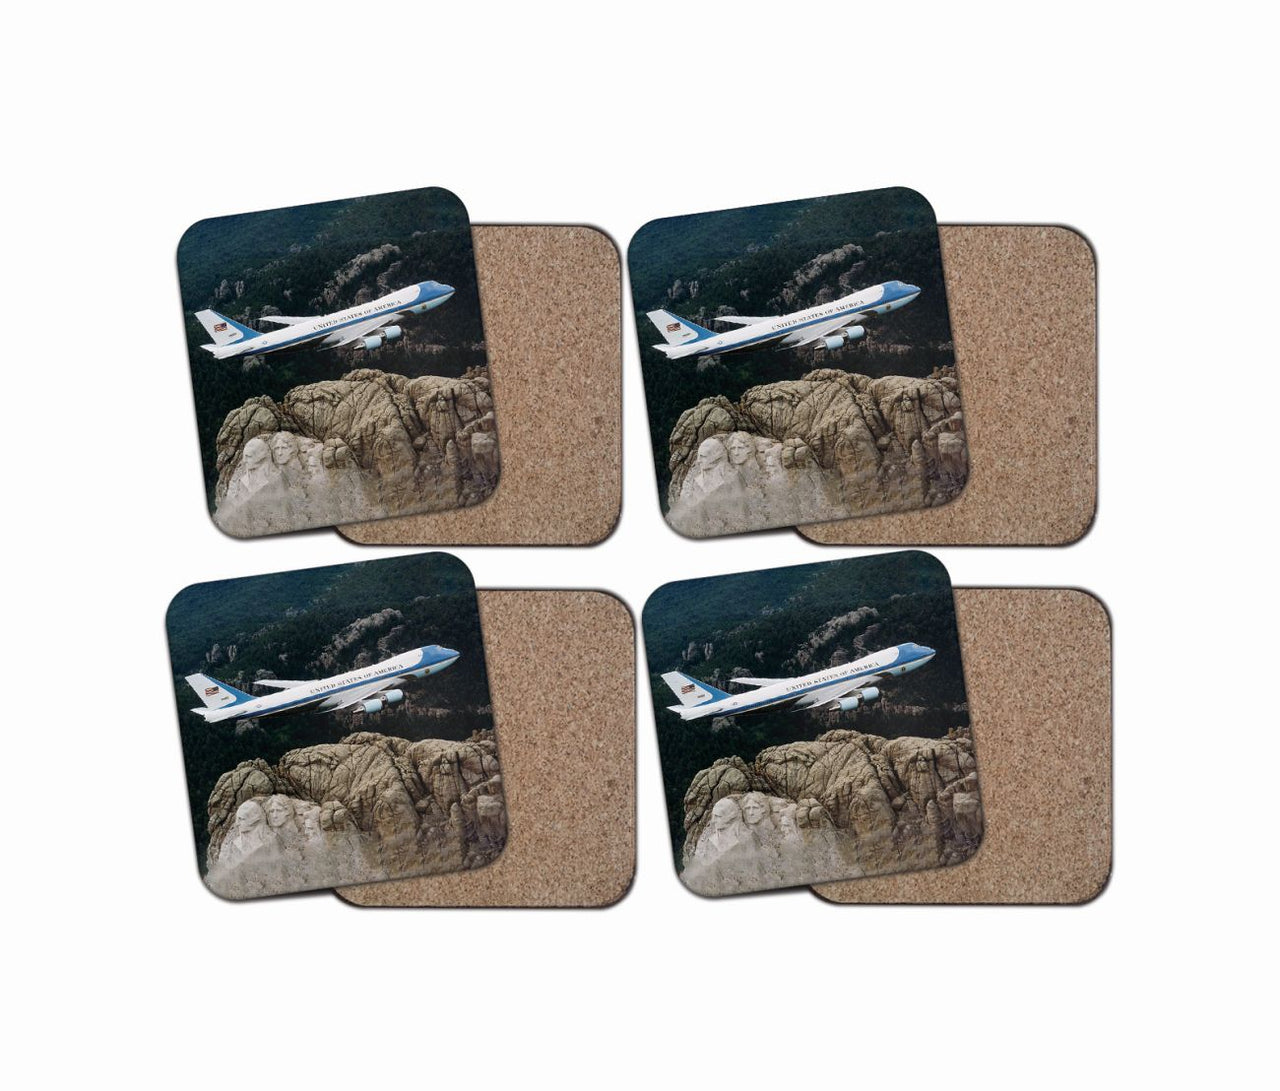 Cruising United States of America Boeing 747 Printed Pillows Designed Coasters